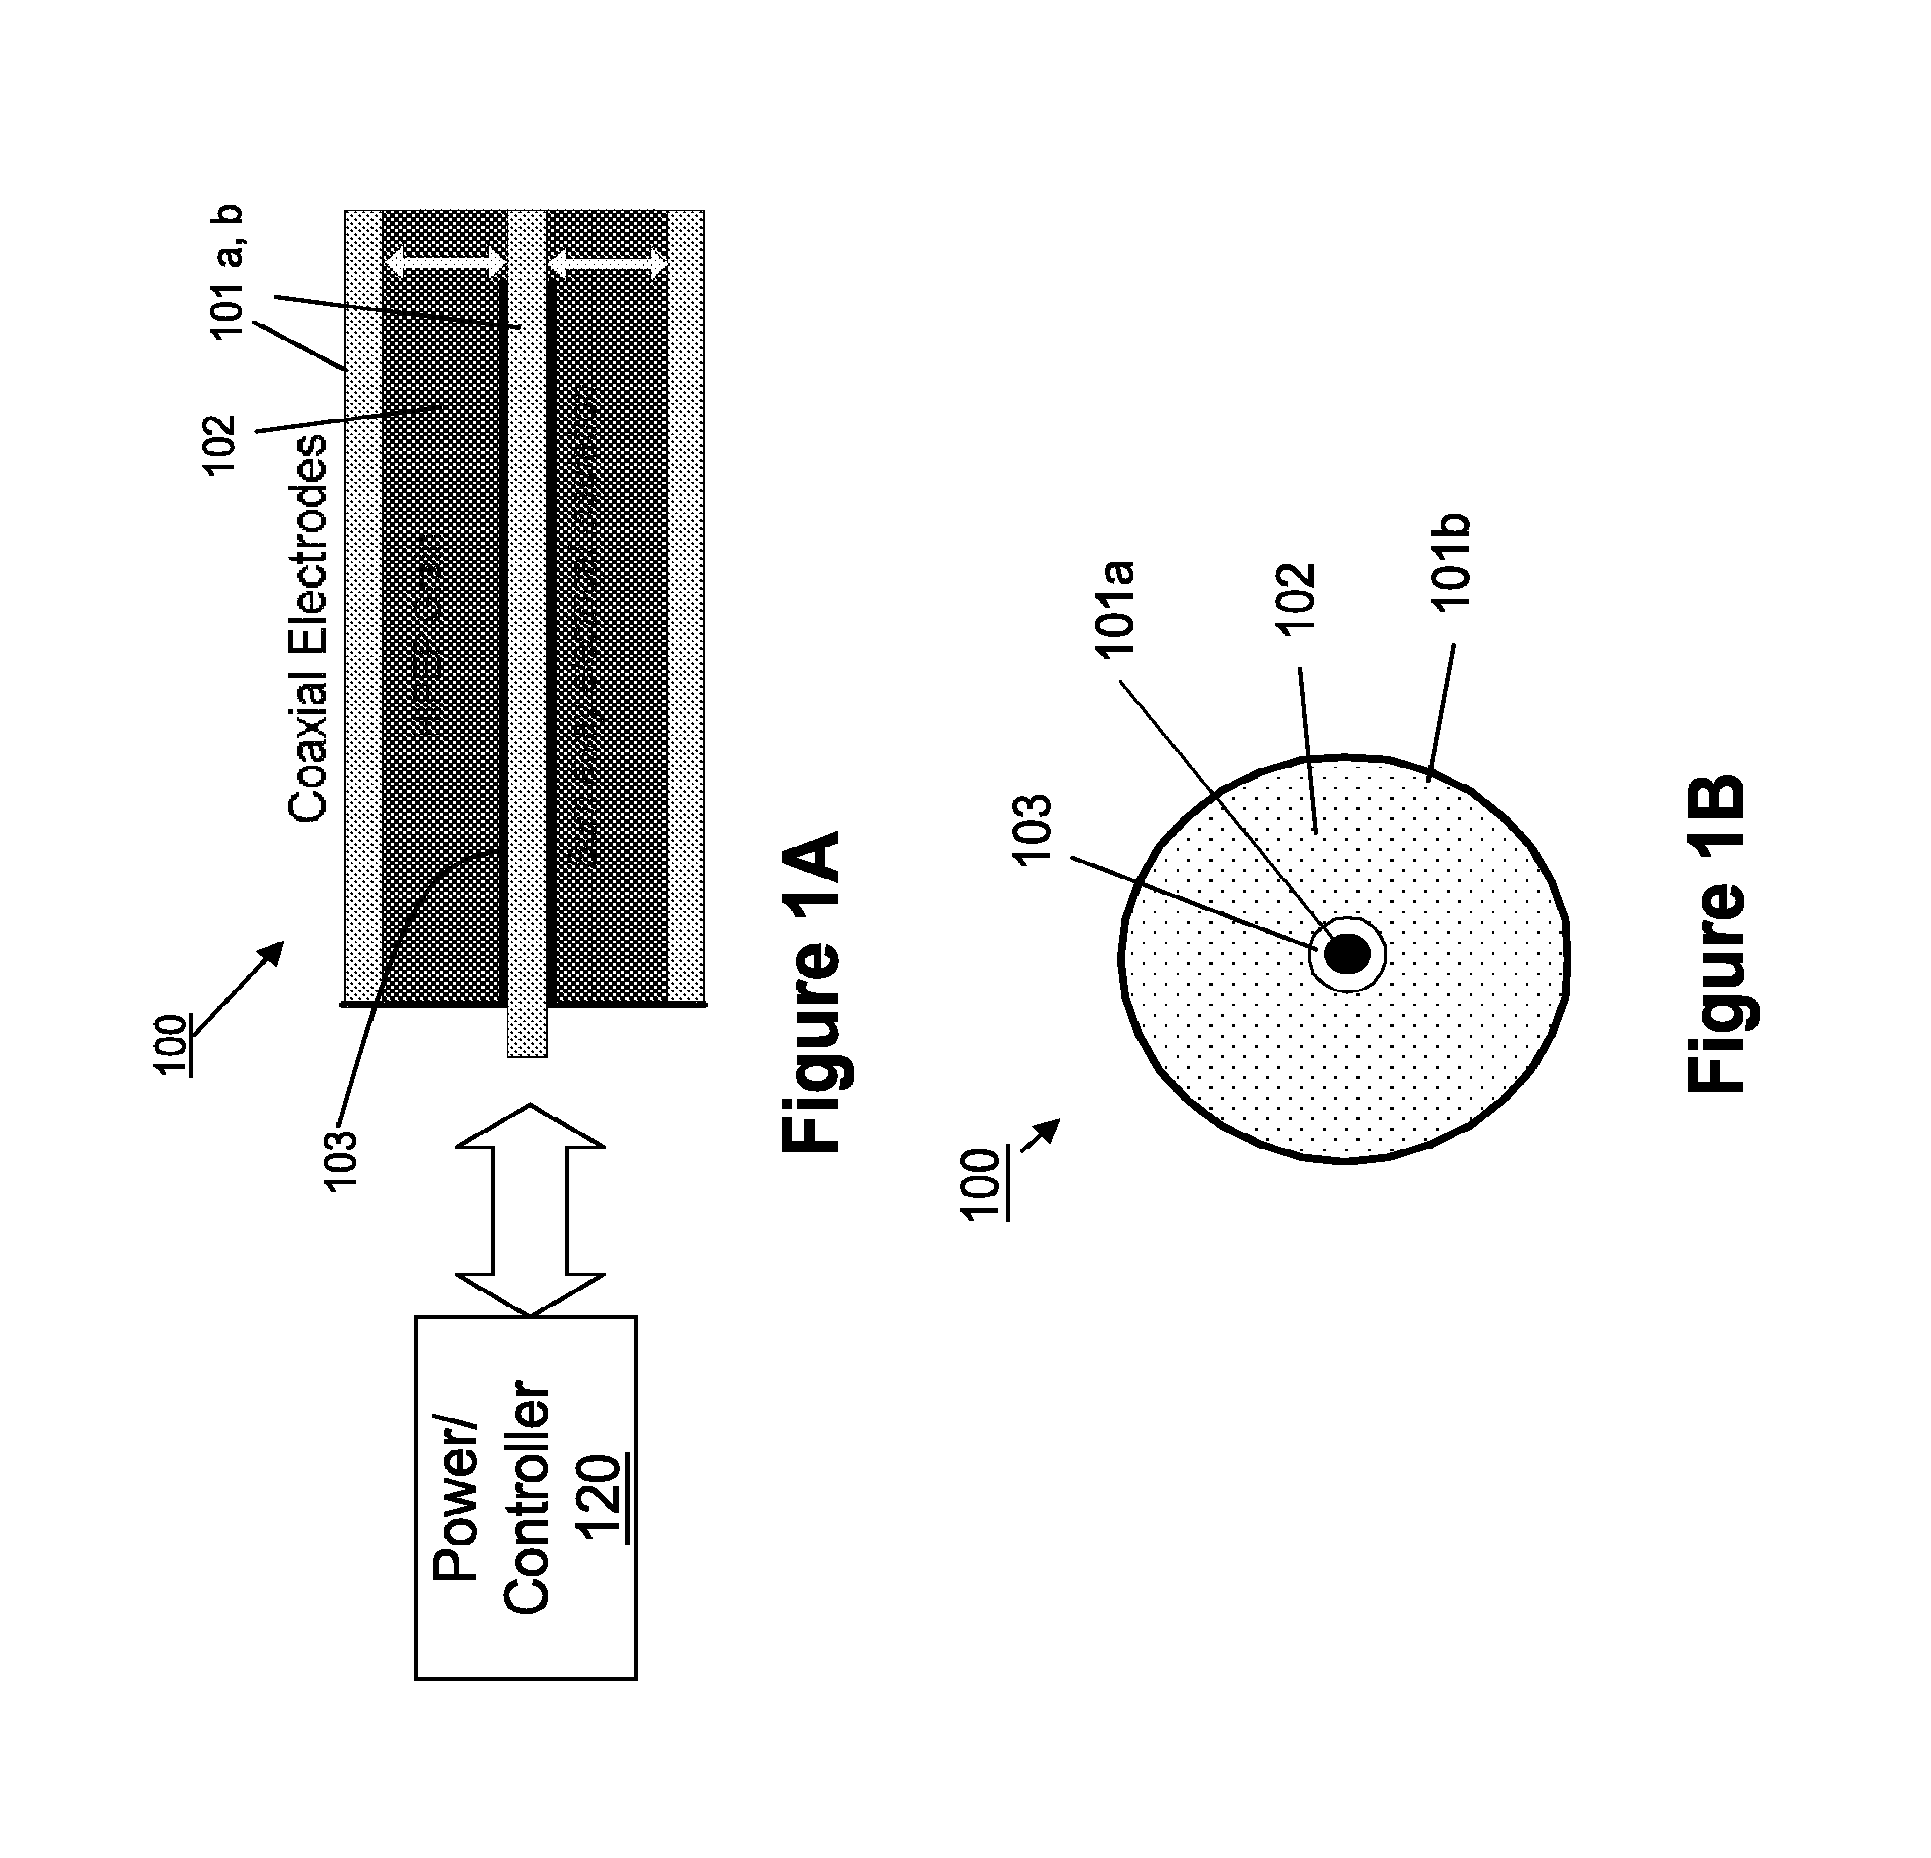 Electrode ignition and control of electrically ignitable materials